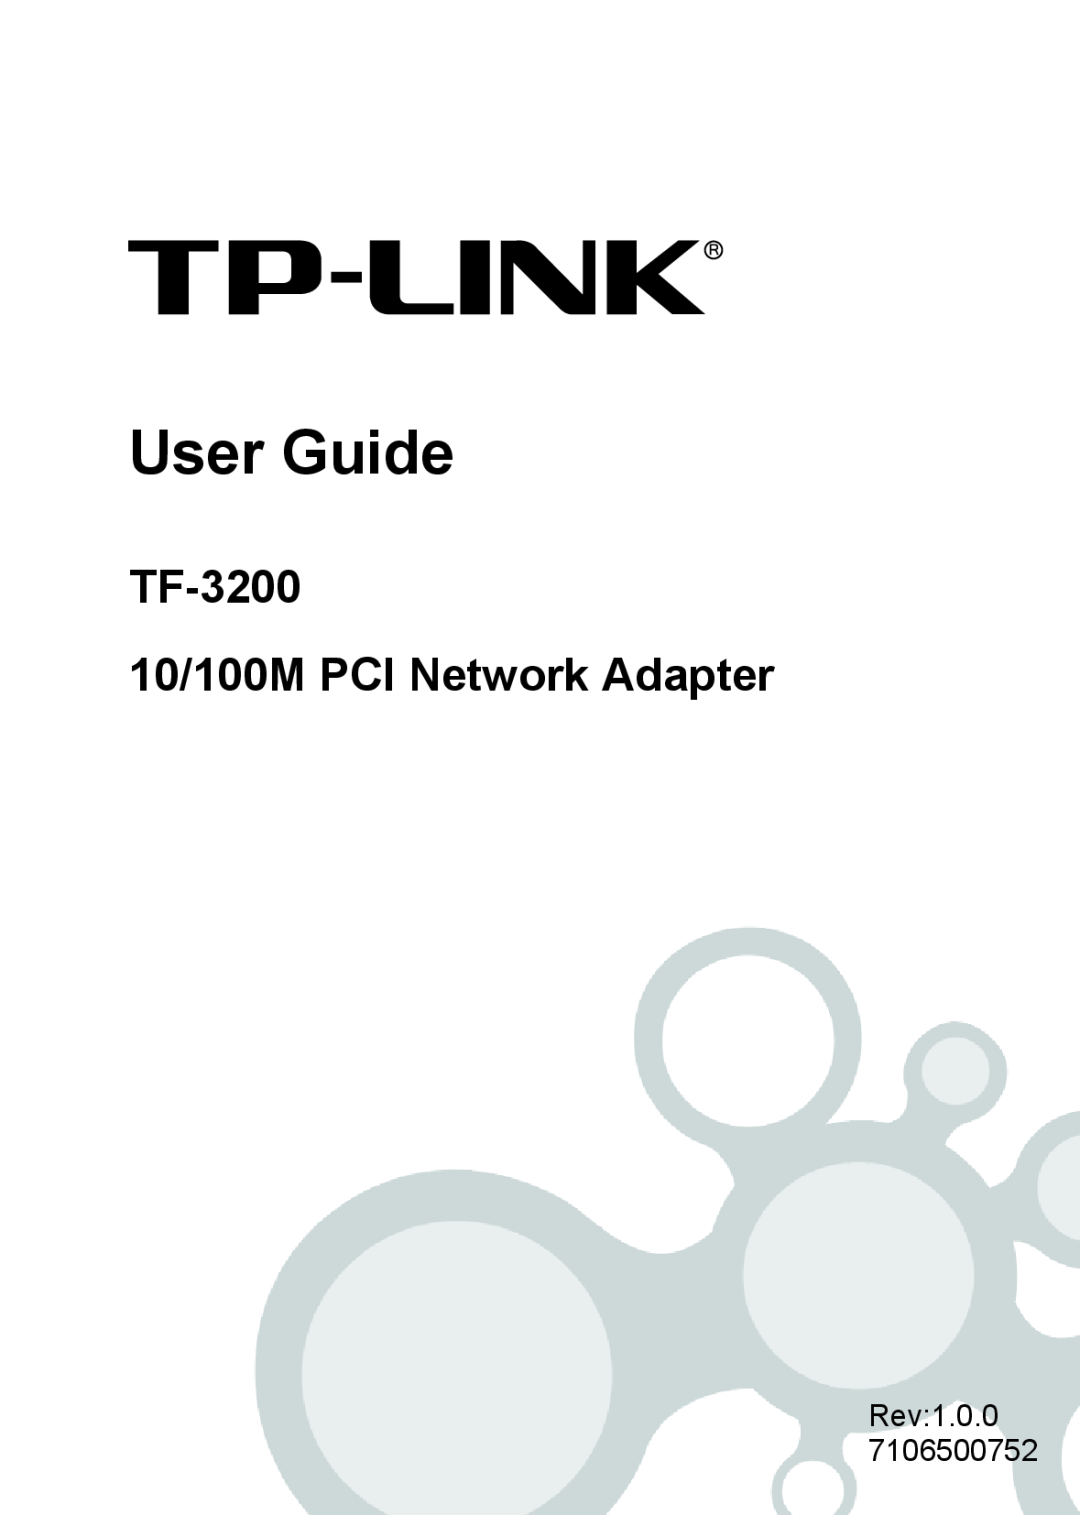 TP-Link manual User Guide, TF-3200 10/100M PCI Network Adapter 